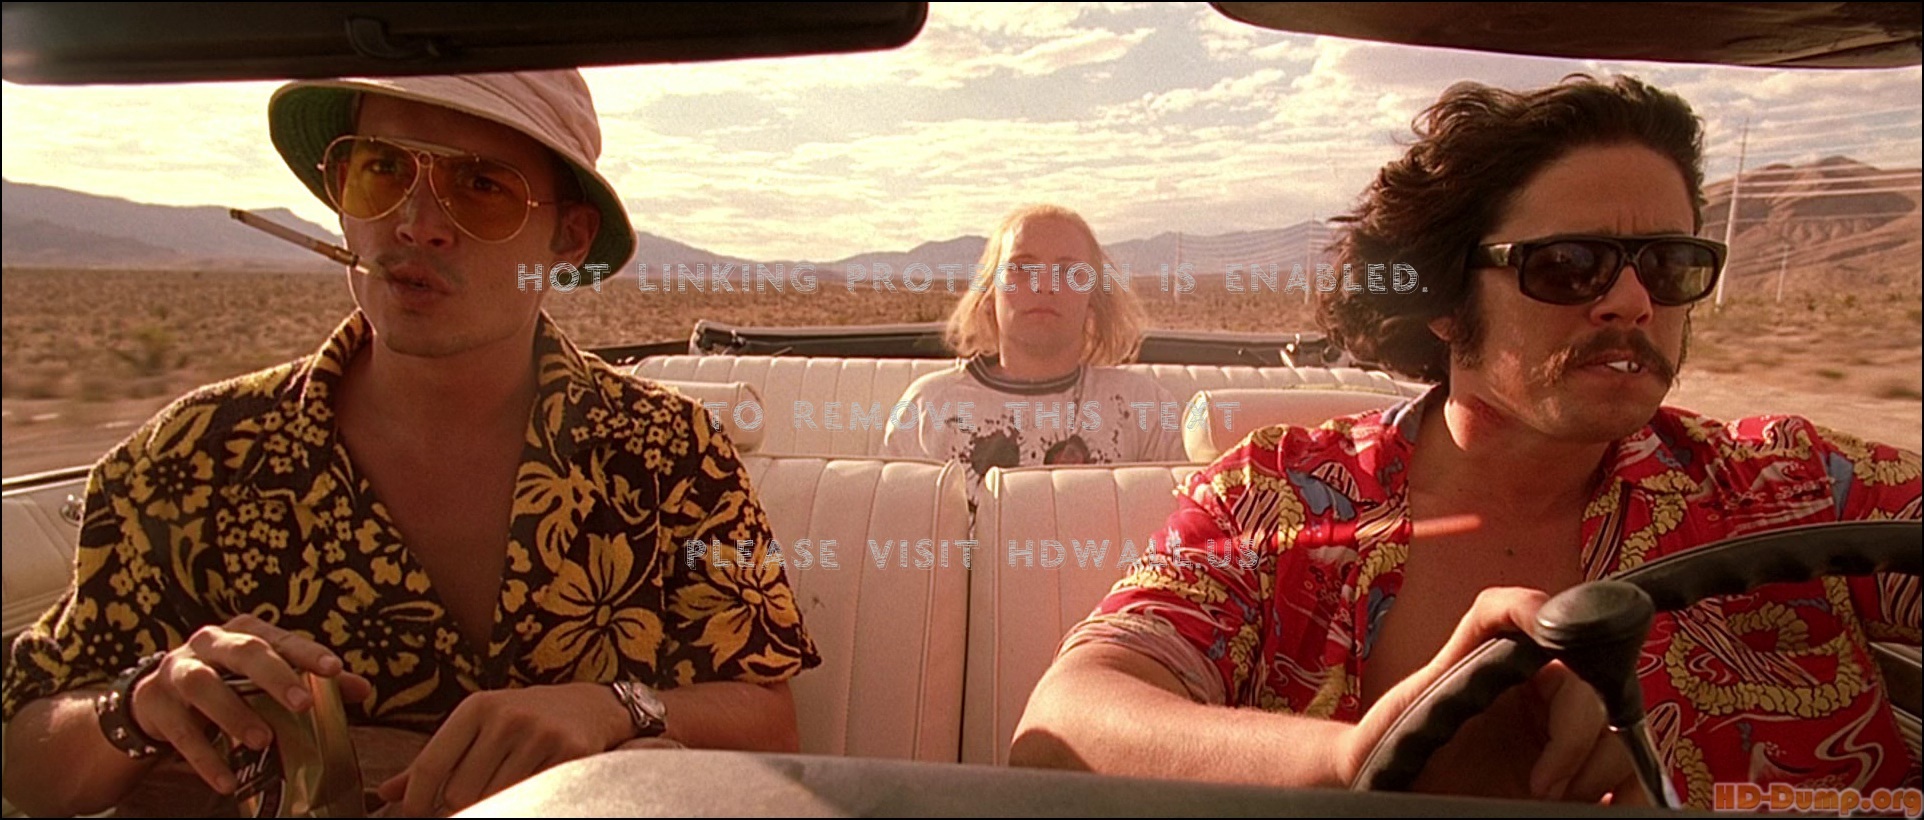 Fear And Loathing In Las Vegas Wallpaper Travel Fun Vacation Vehicle Photography Wallpaperuse